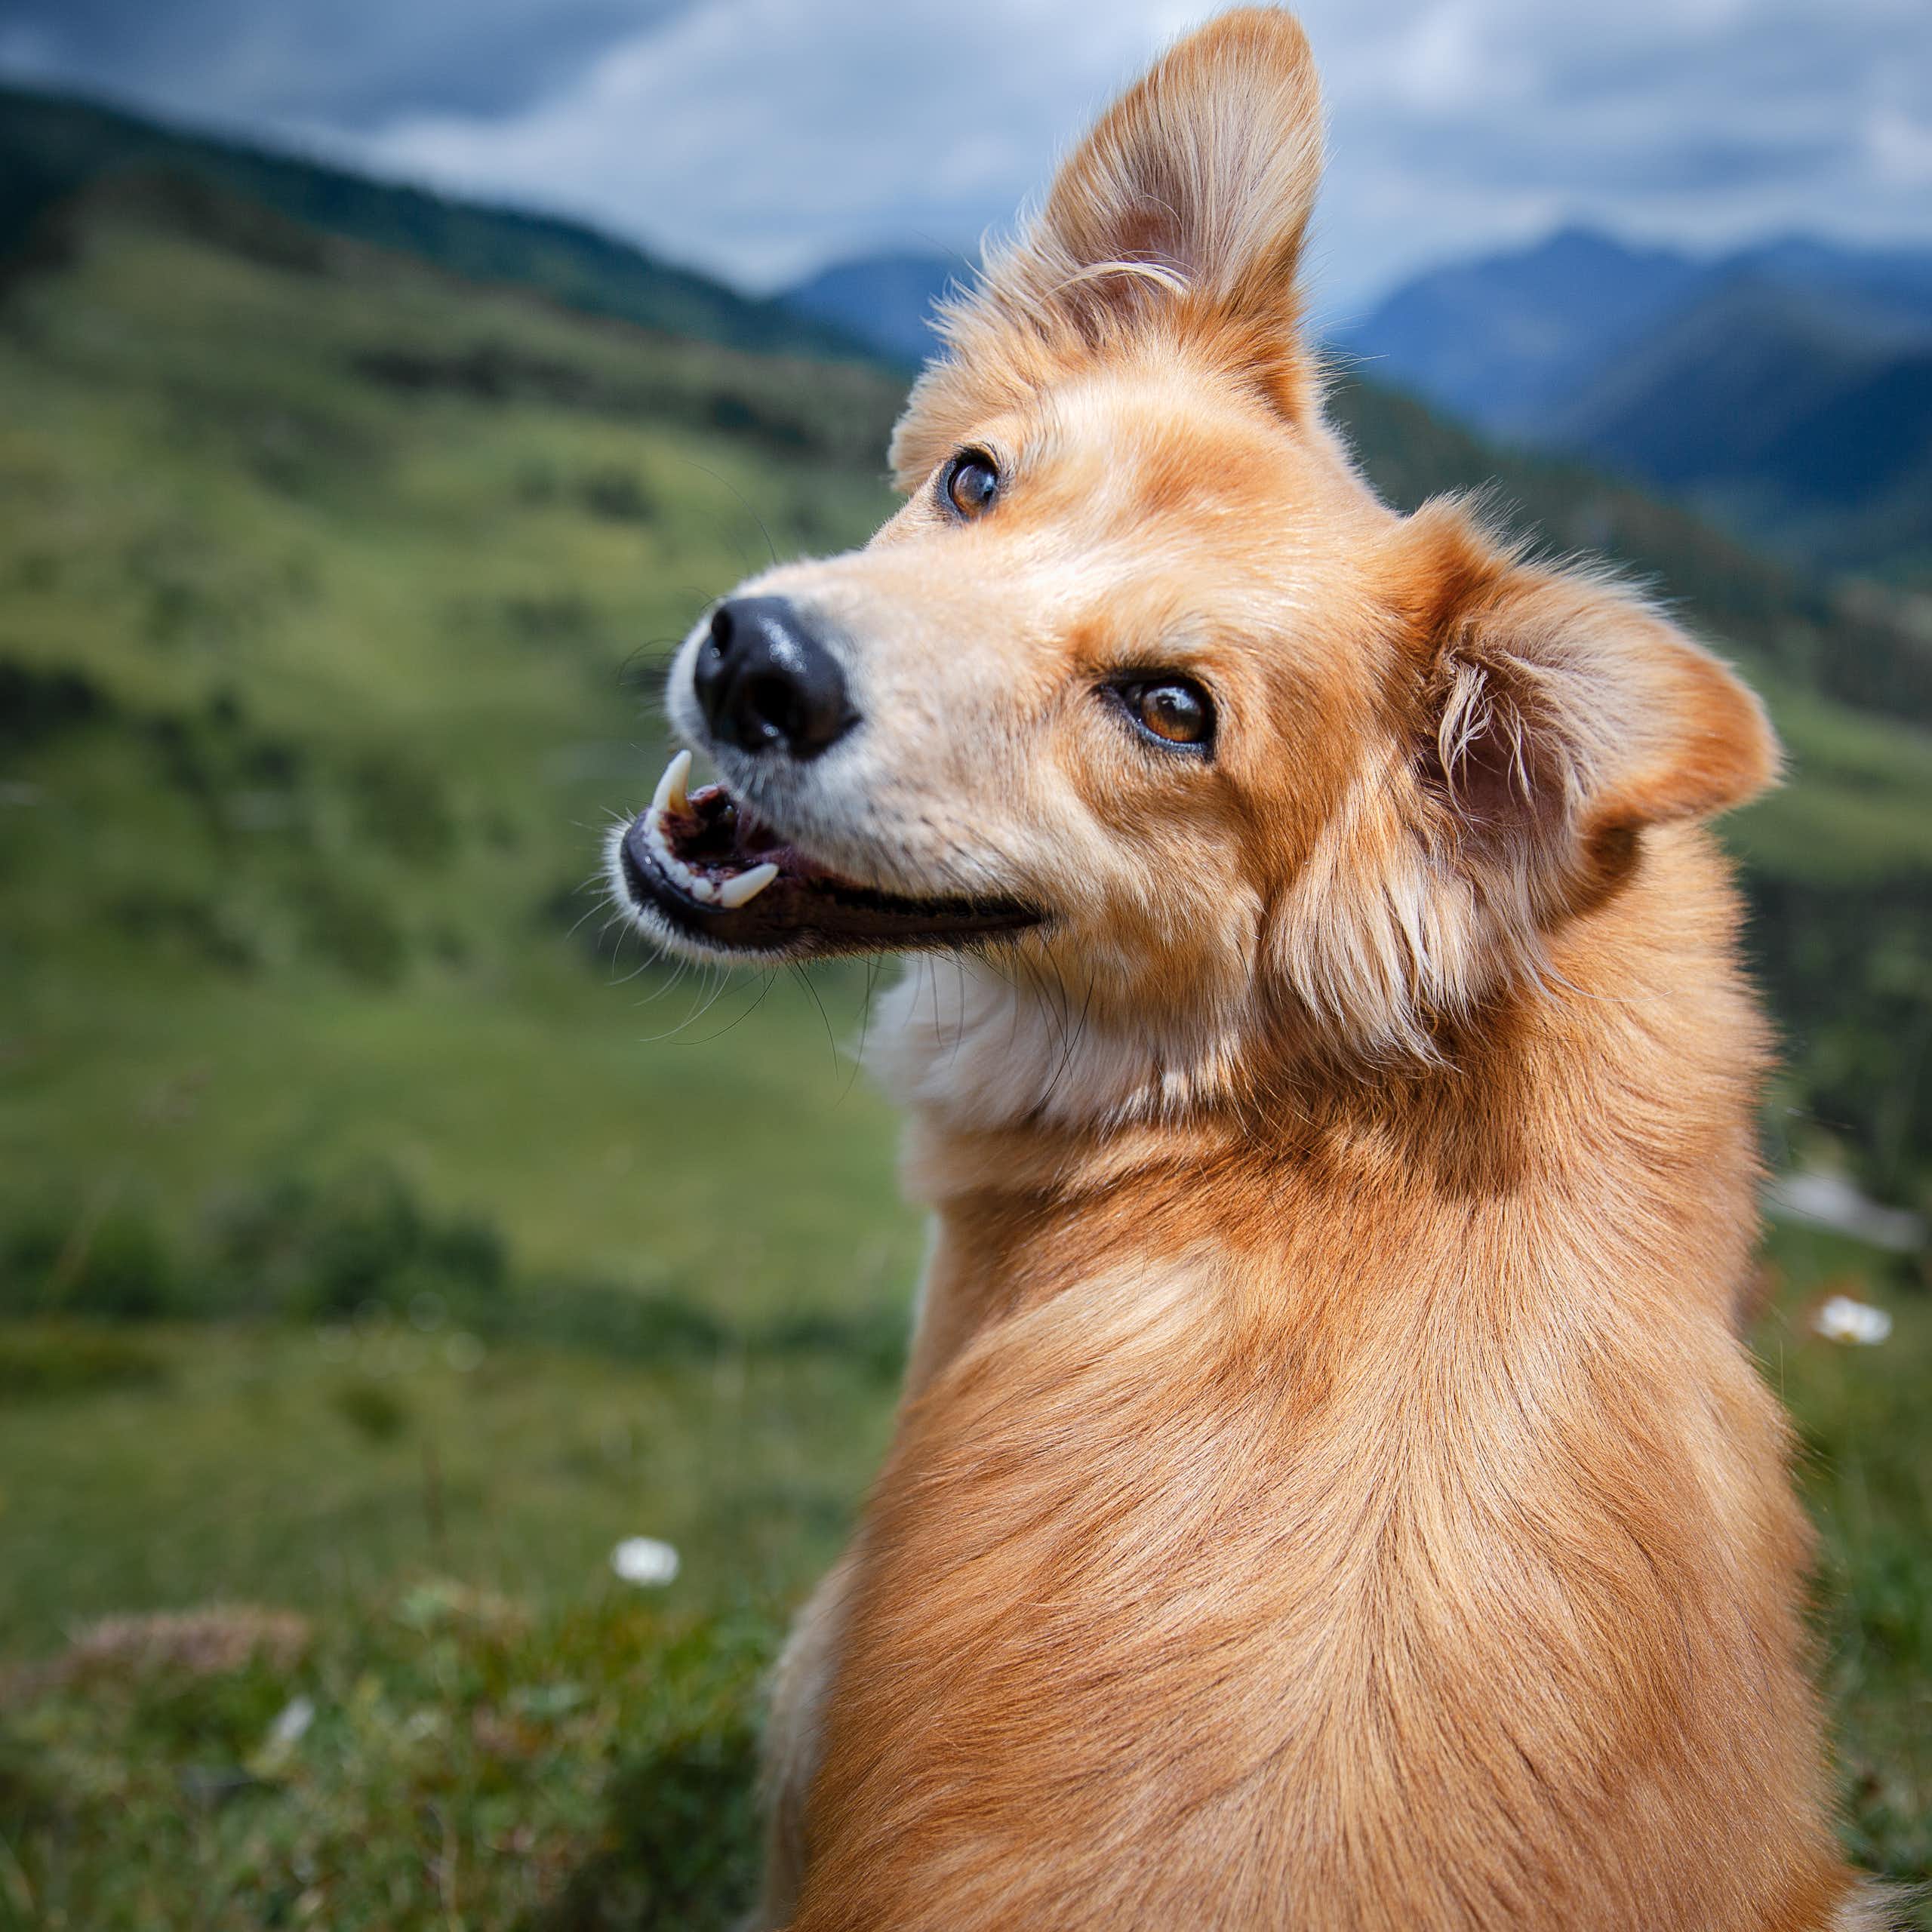 Dog looking at camera with mountains in the background